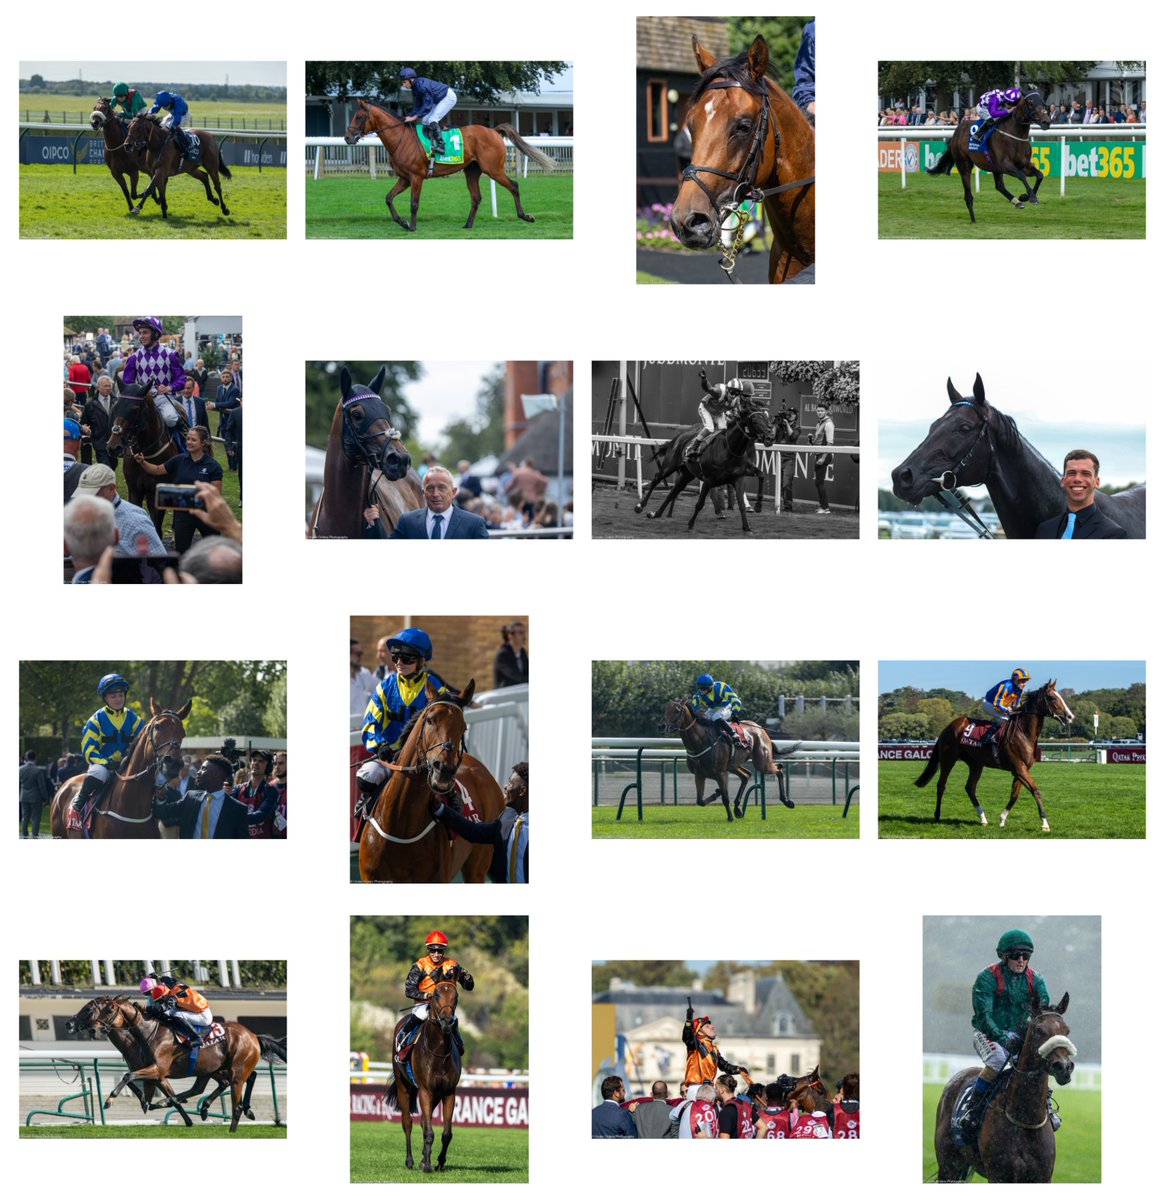 𝗖𝗮𝗿𝘁𝗶𝗲𝗿 𝗔𝘄𝗮𝗿𝗱𝘀 𝟮𝟬𝟮𝟯
It struck me that I have managed to catch all 7 award winning horses in the flesh. What an absolute pleasure it has been and feel very lucky to have done so.
#UnderstandingWife #BudgetBlown #lovehorses #horsepower #cartierawards